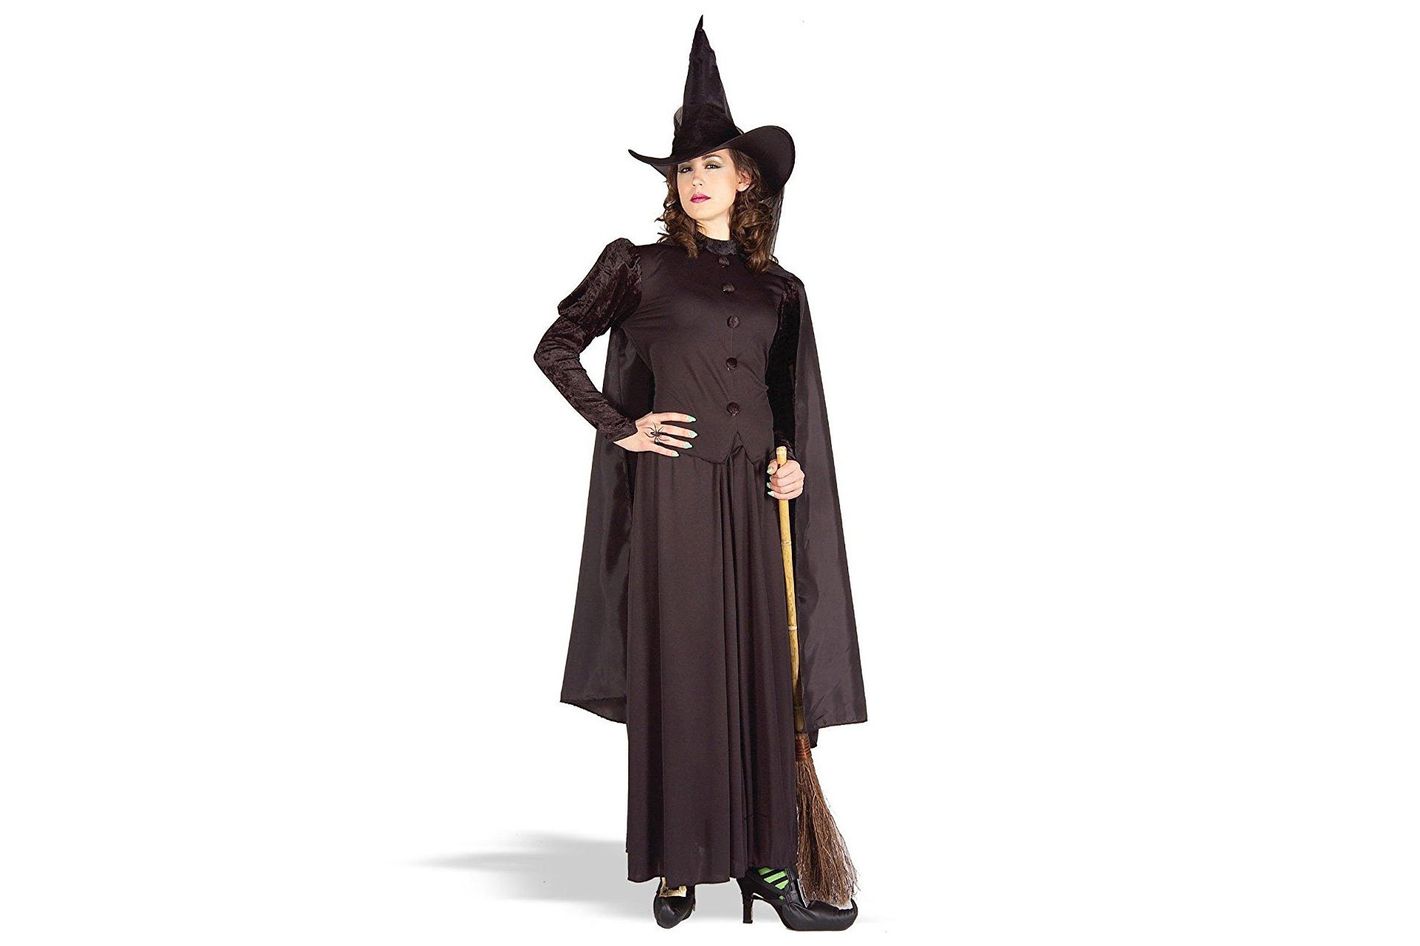 Details about NonEcho Halloween Costumes for Women Retro Witch Sorceress Co...